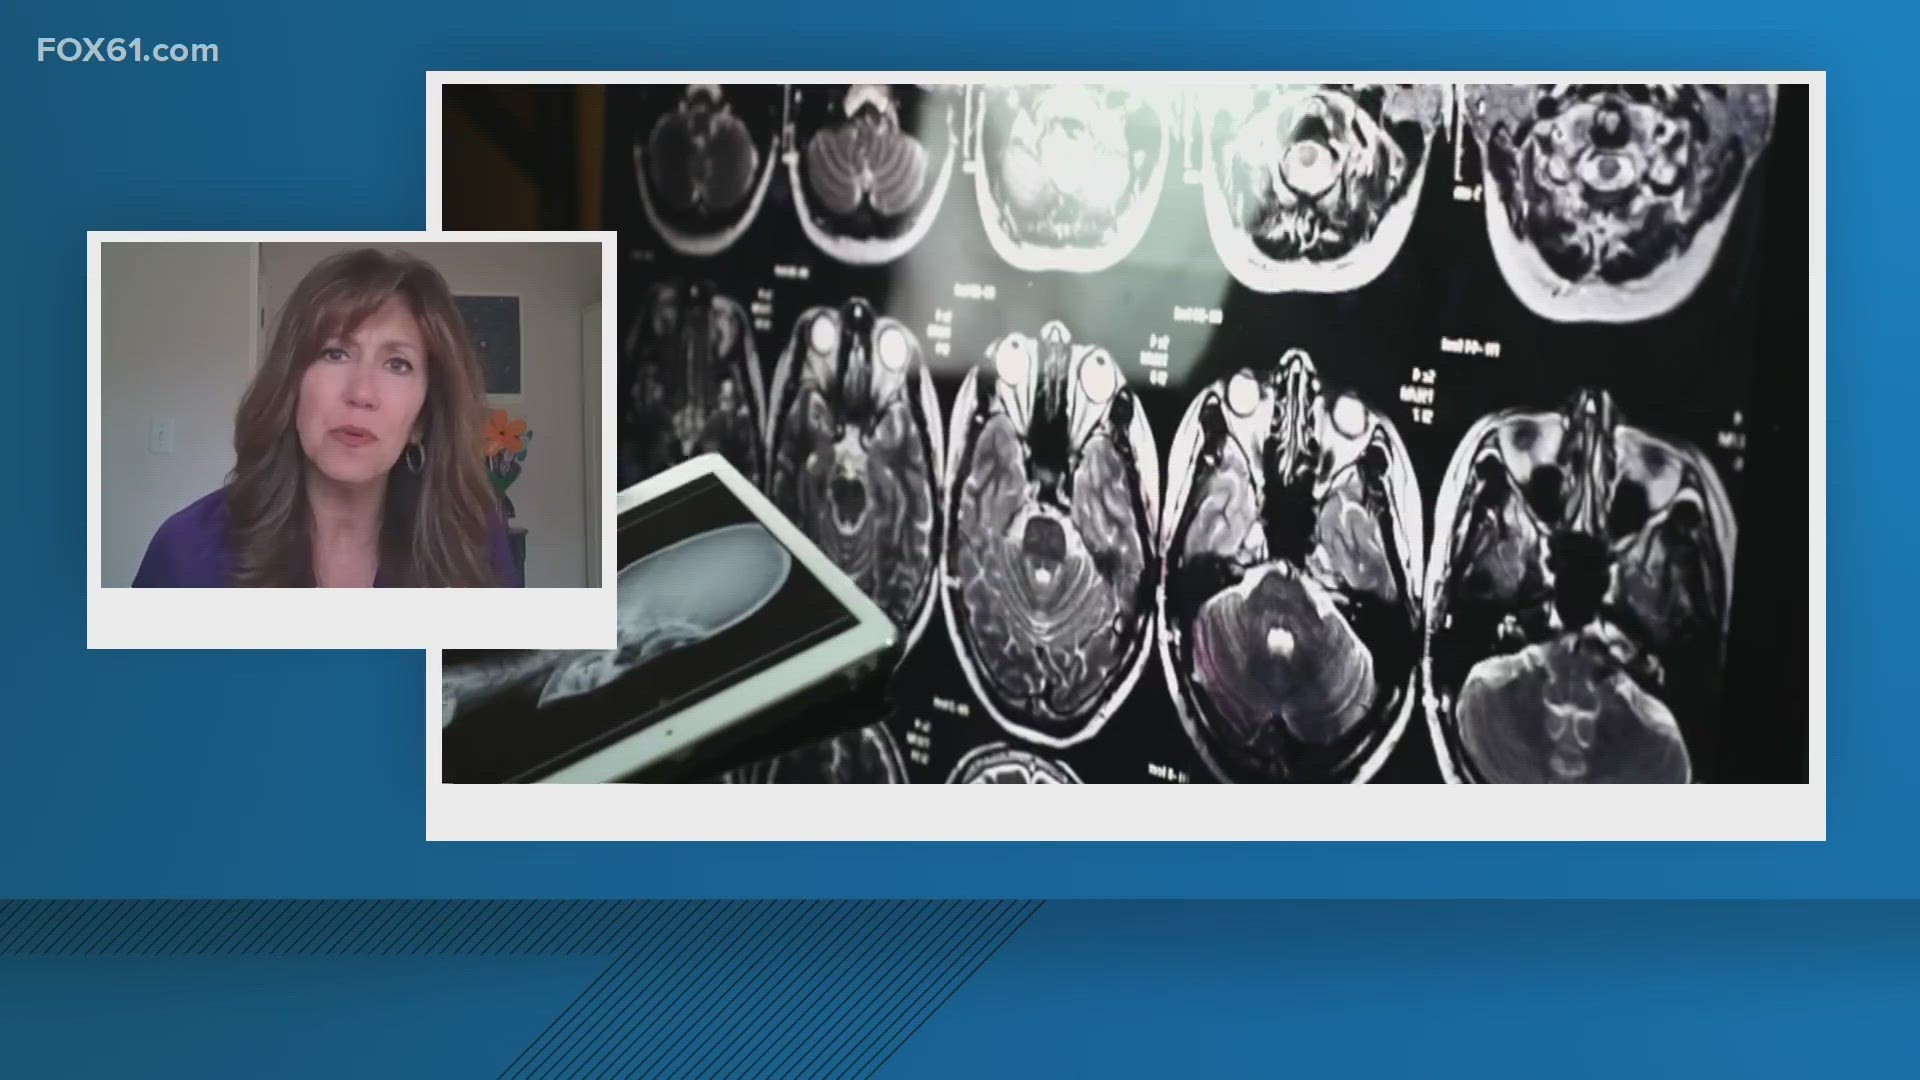 Kristin Cusato with the CT Alzheimer's Association discusses the differences between Alzheimer's and dementia following former first lady Rosalynn Carter's diagnosis